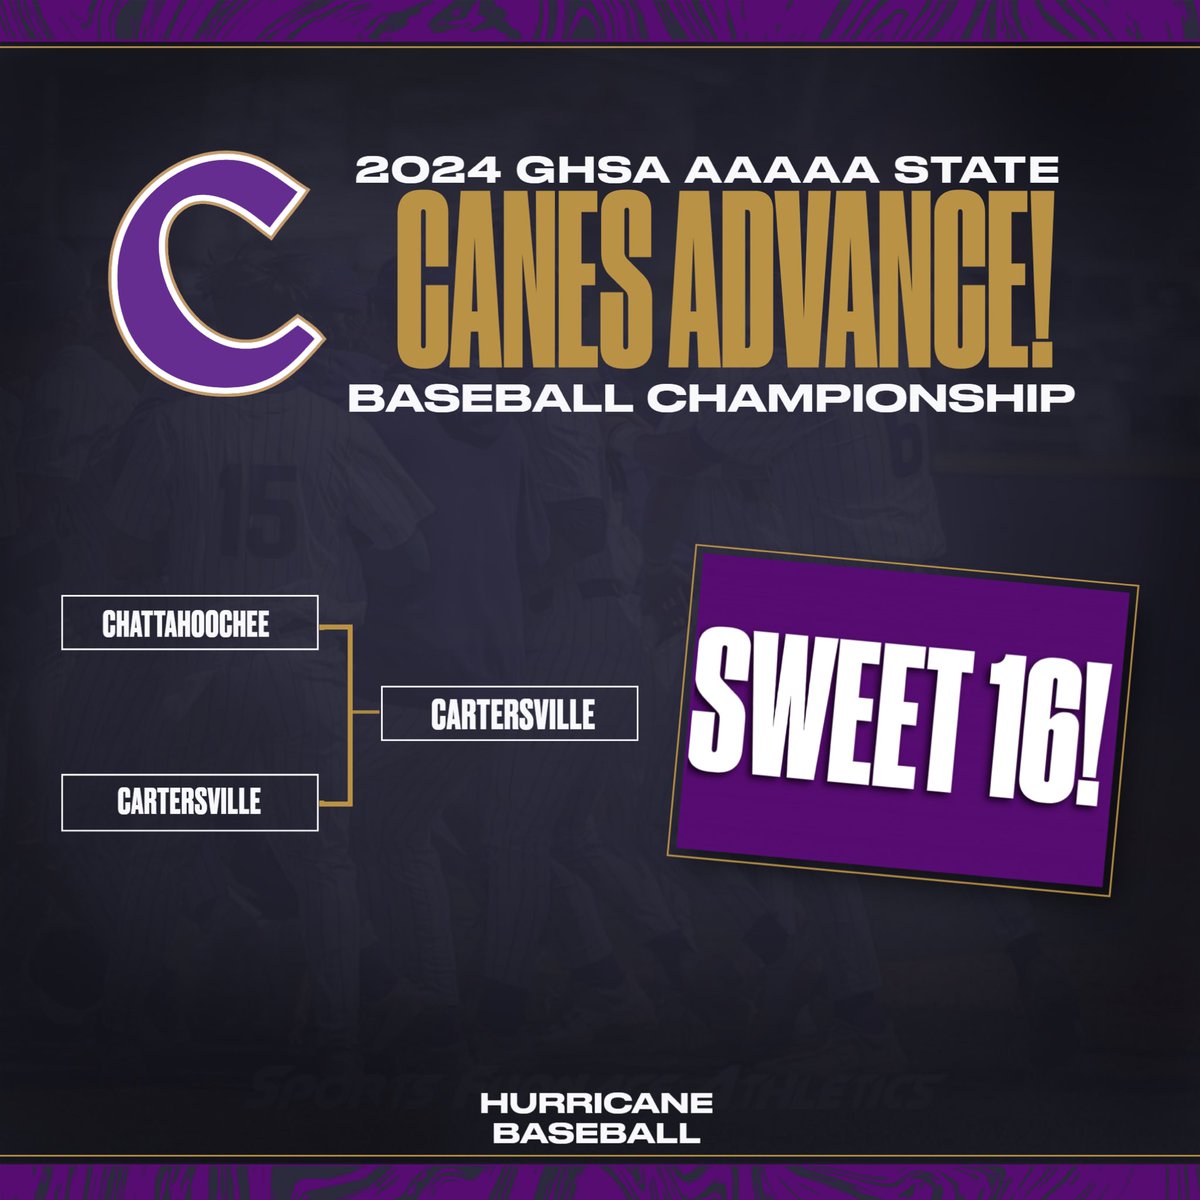 Canes ADVANCE! Cartersville completed a sweep of Chattahoochee with a 5-2 win to advance to the Sweet 16 for the 6th-straight season & 27th time in the past 28 seasons.